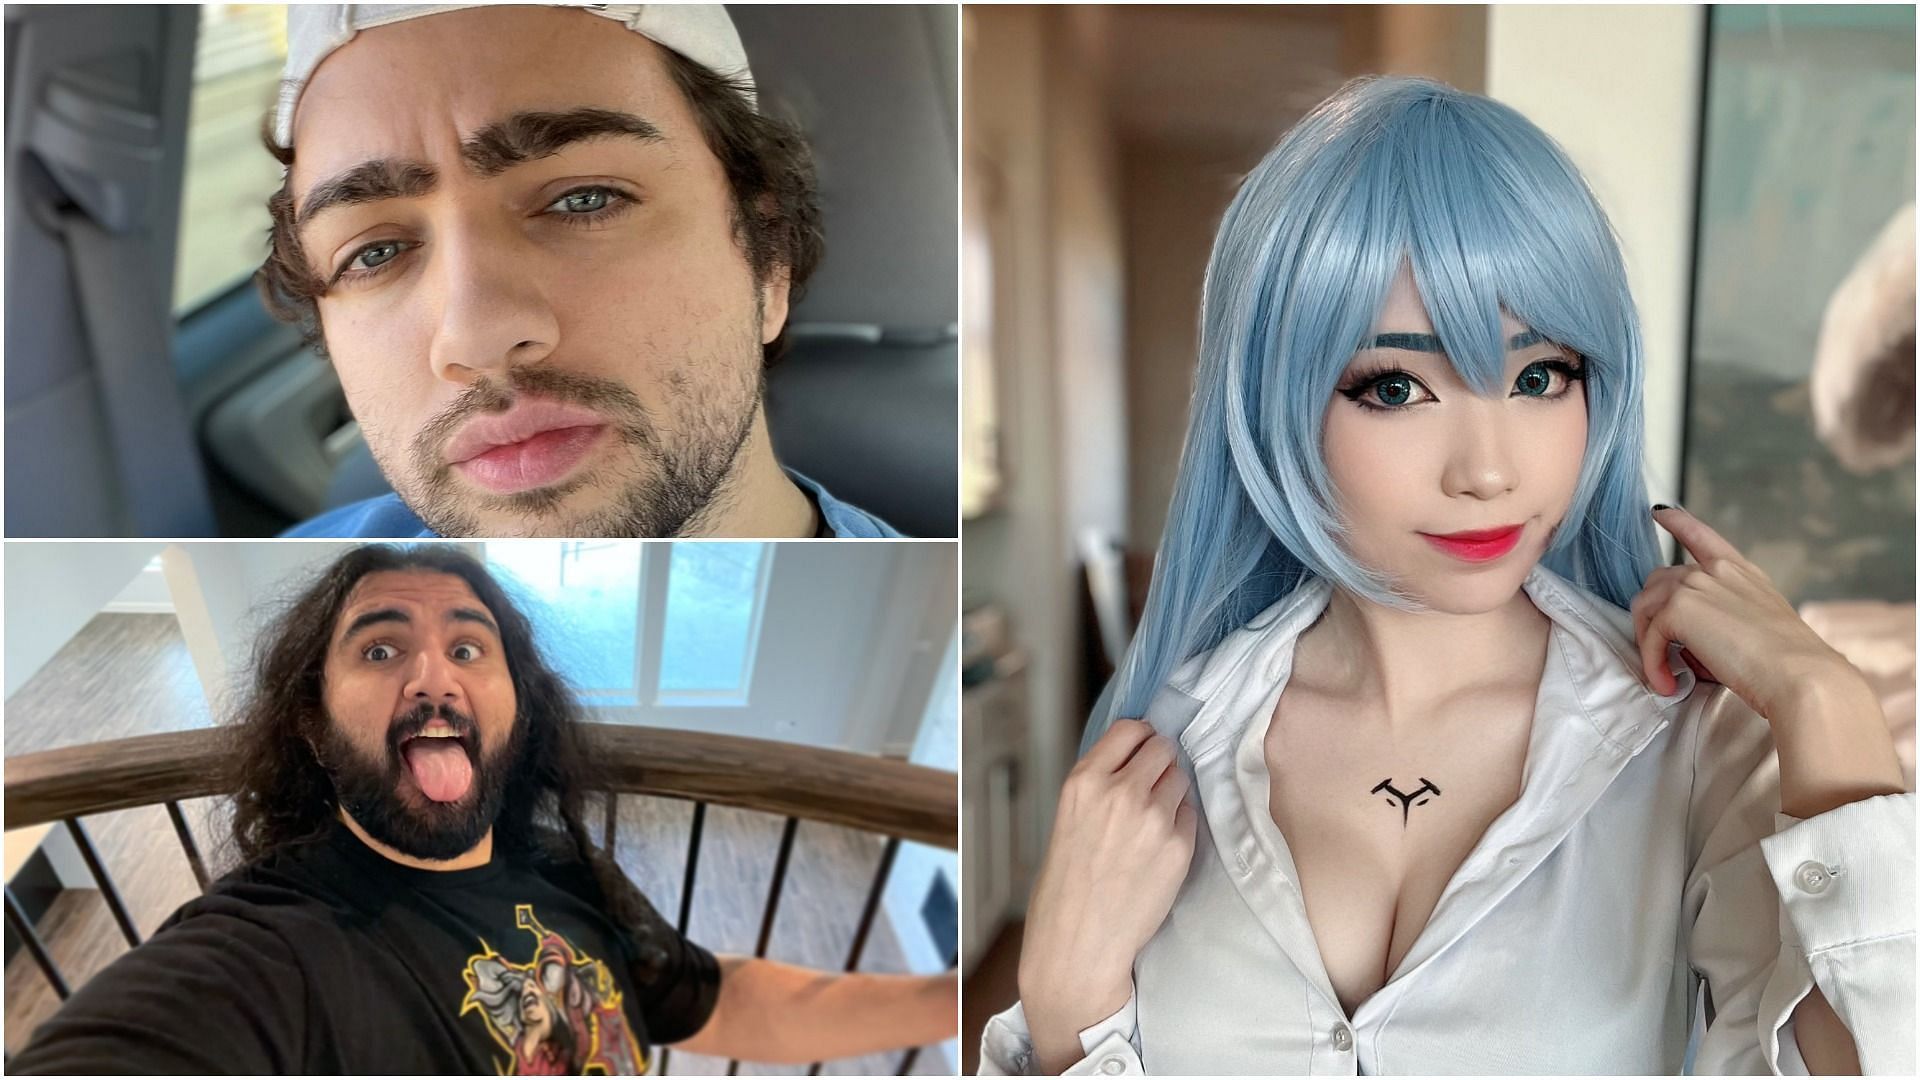 Emiru went all out while singing a System of a Down song with Esfand and Mizkif (Images via Emiru, Esfand, and Mizkif/Twitter)